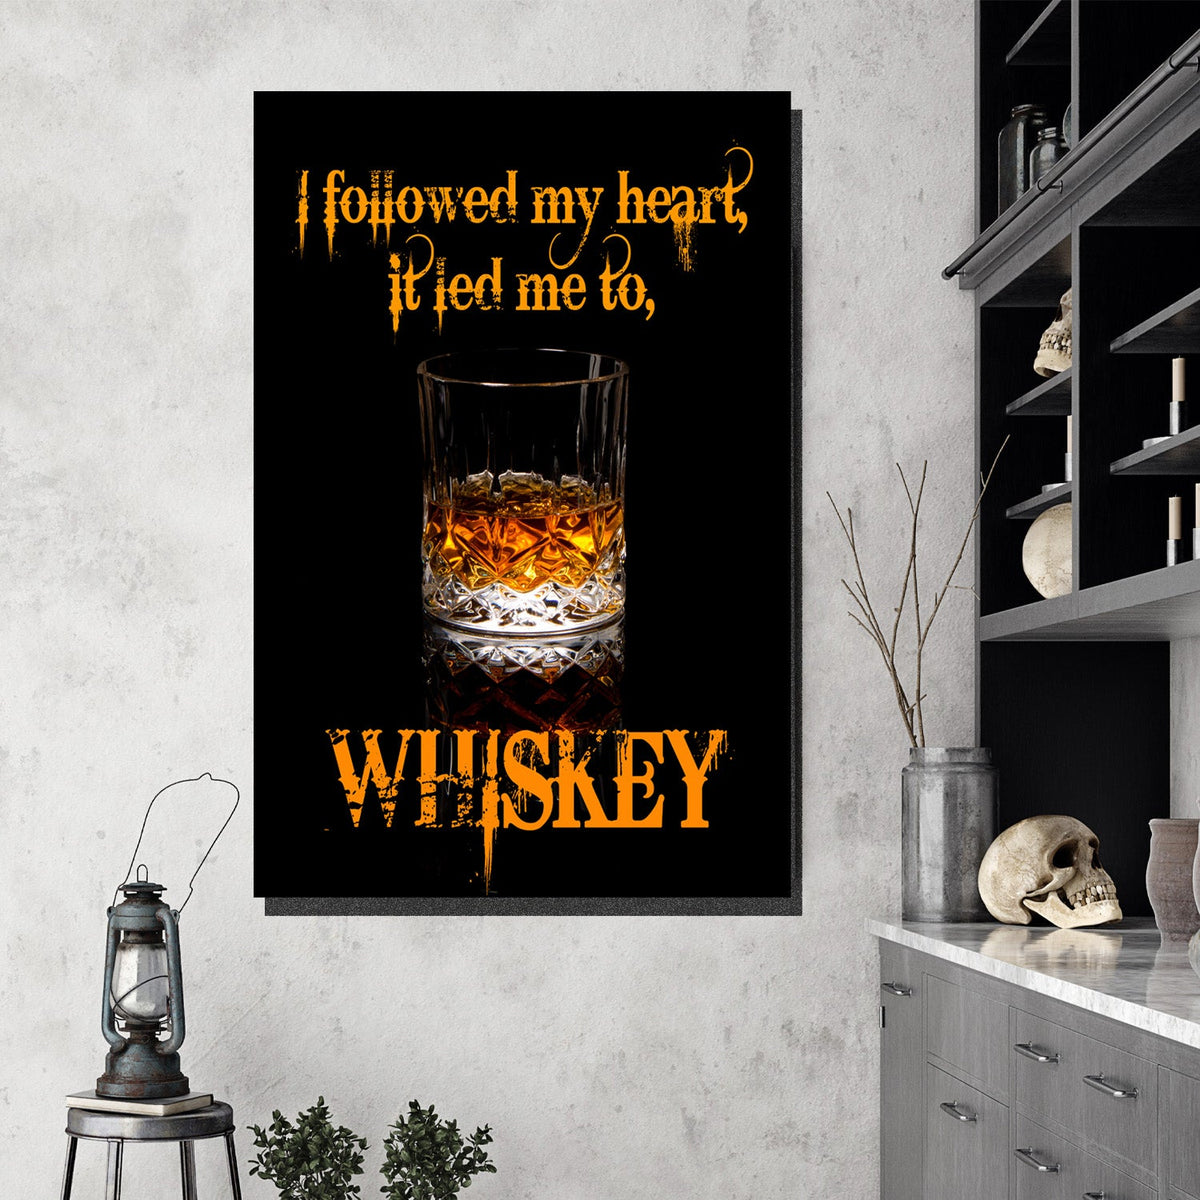 https://cdn.shopify.com/s/files/1/0387/9986/8044/products/WhiskeyQuoteCanvasArtprintStretched-4.jpg